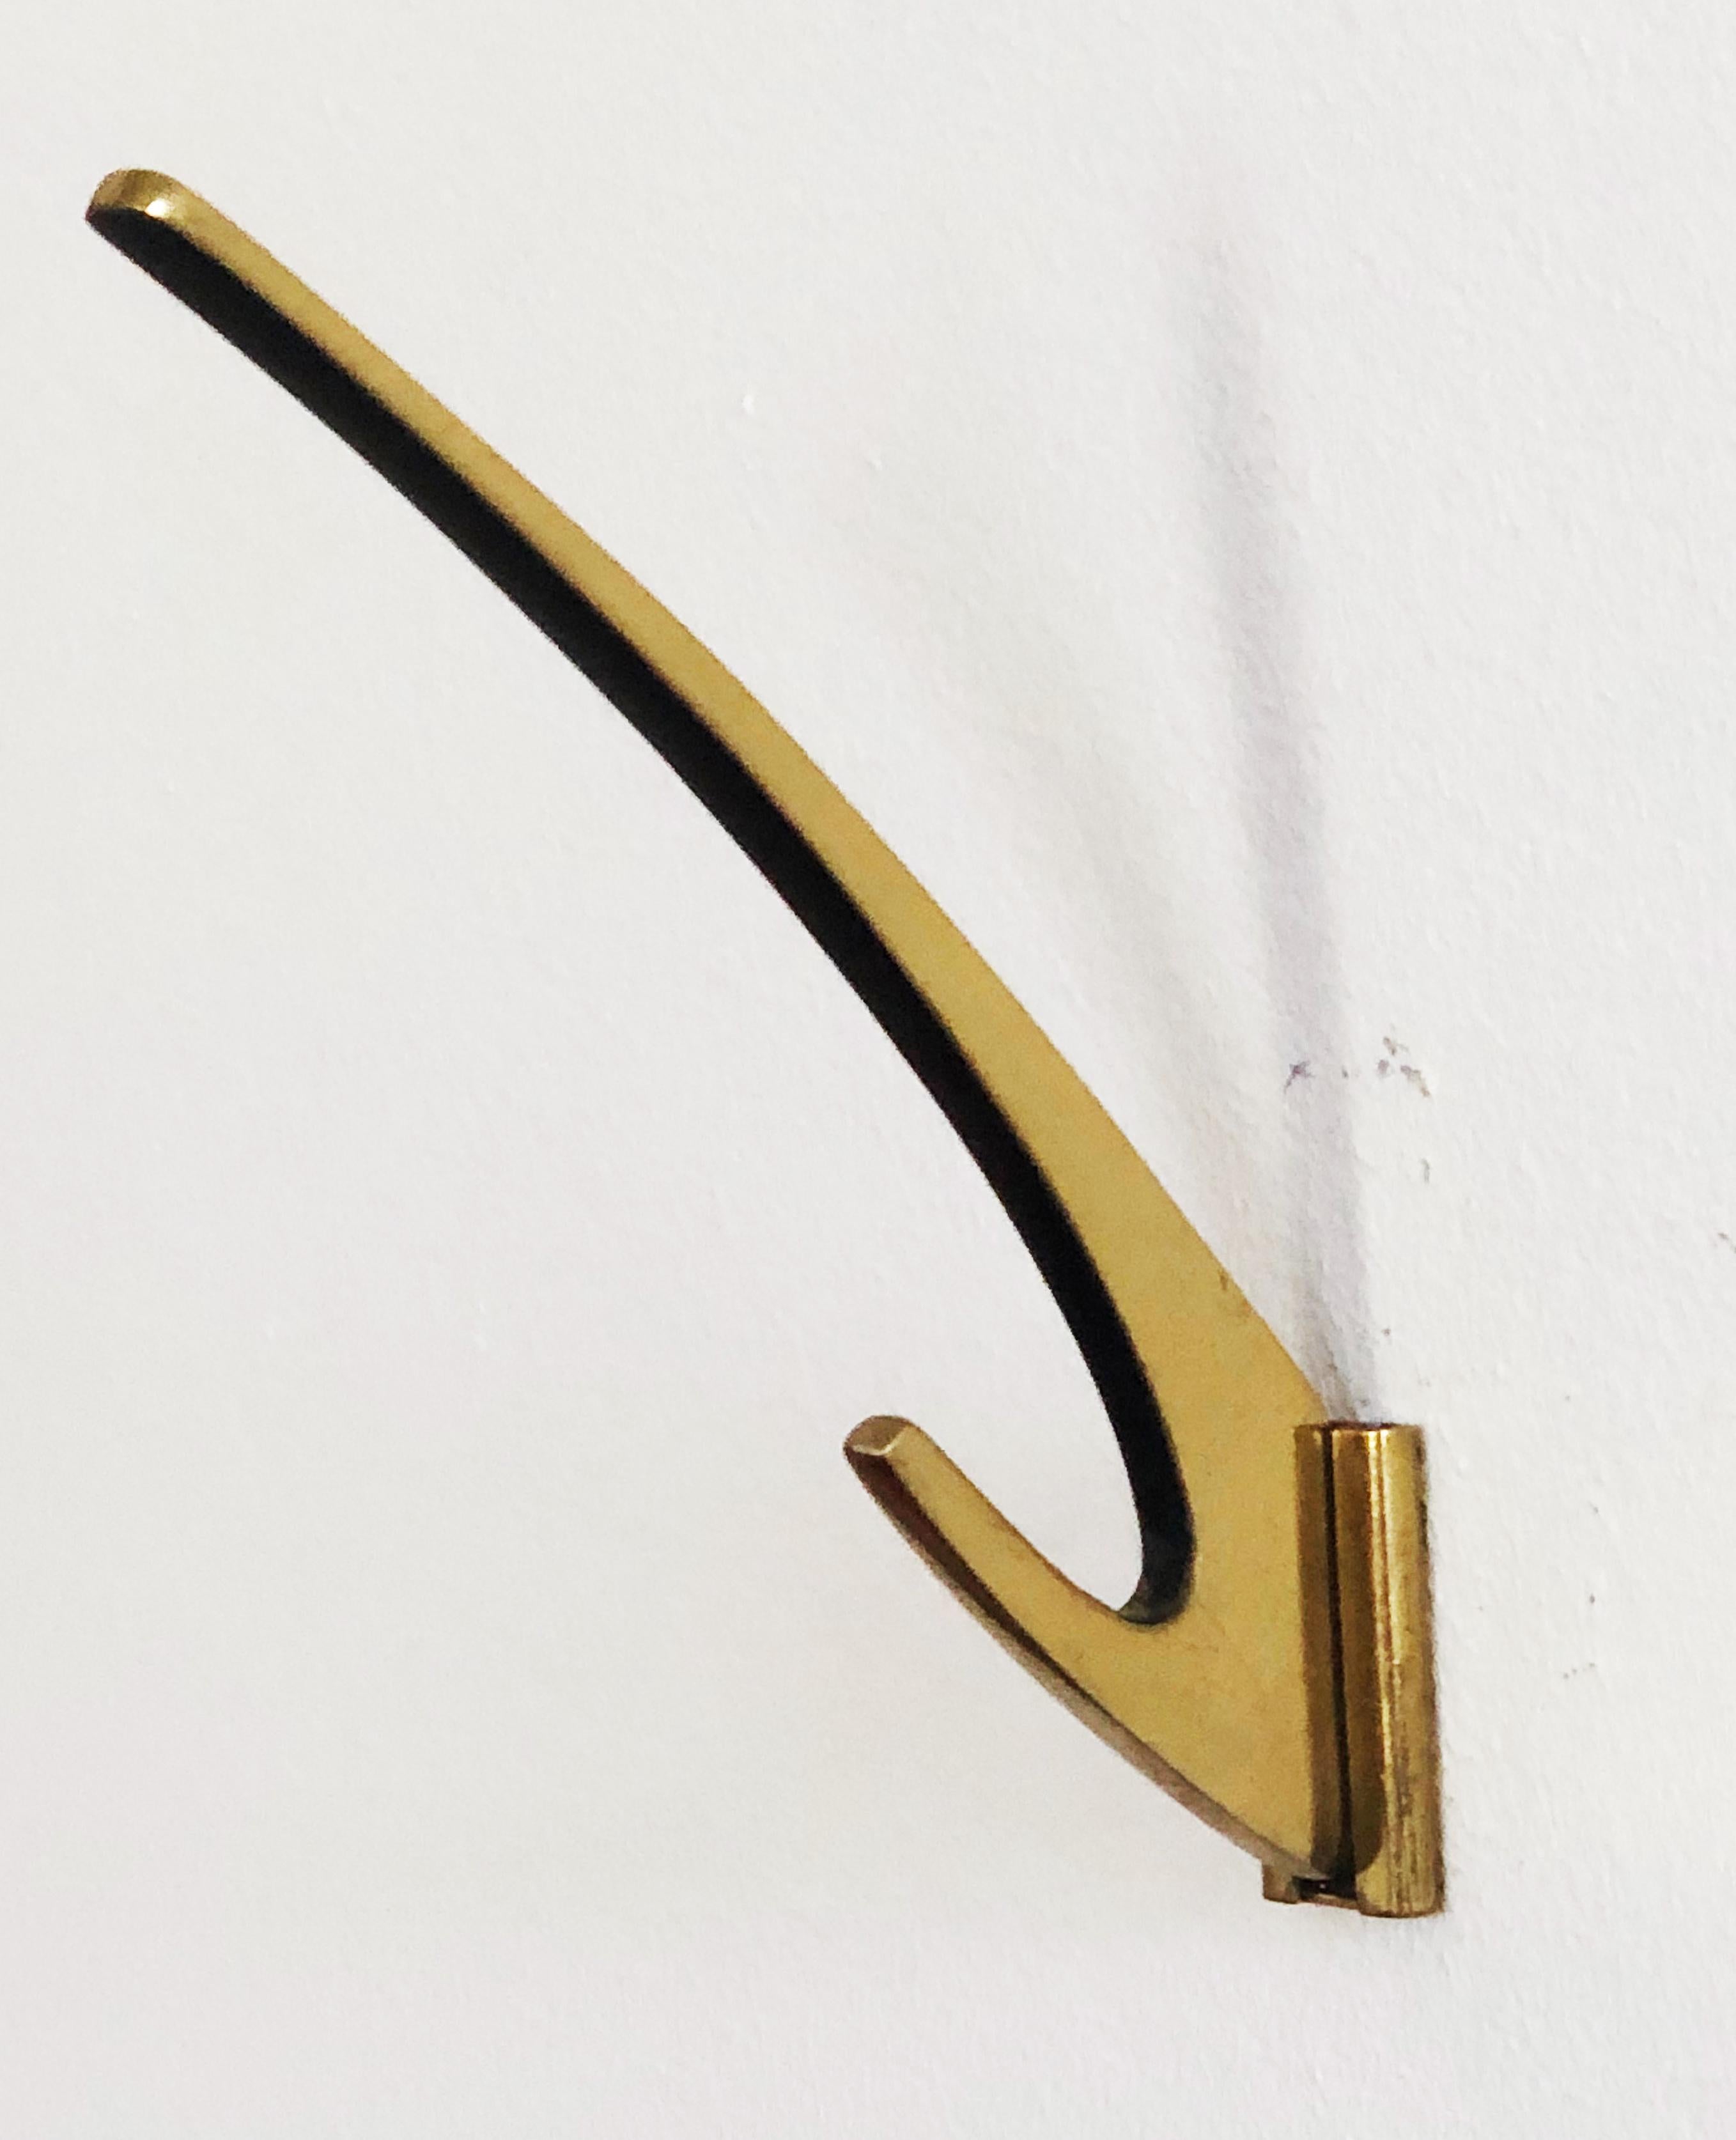 Brass hooks manufactured by Hertha Baller in Austria in the 1950s.
2 available.